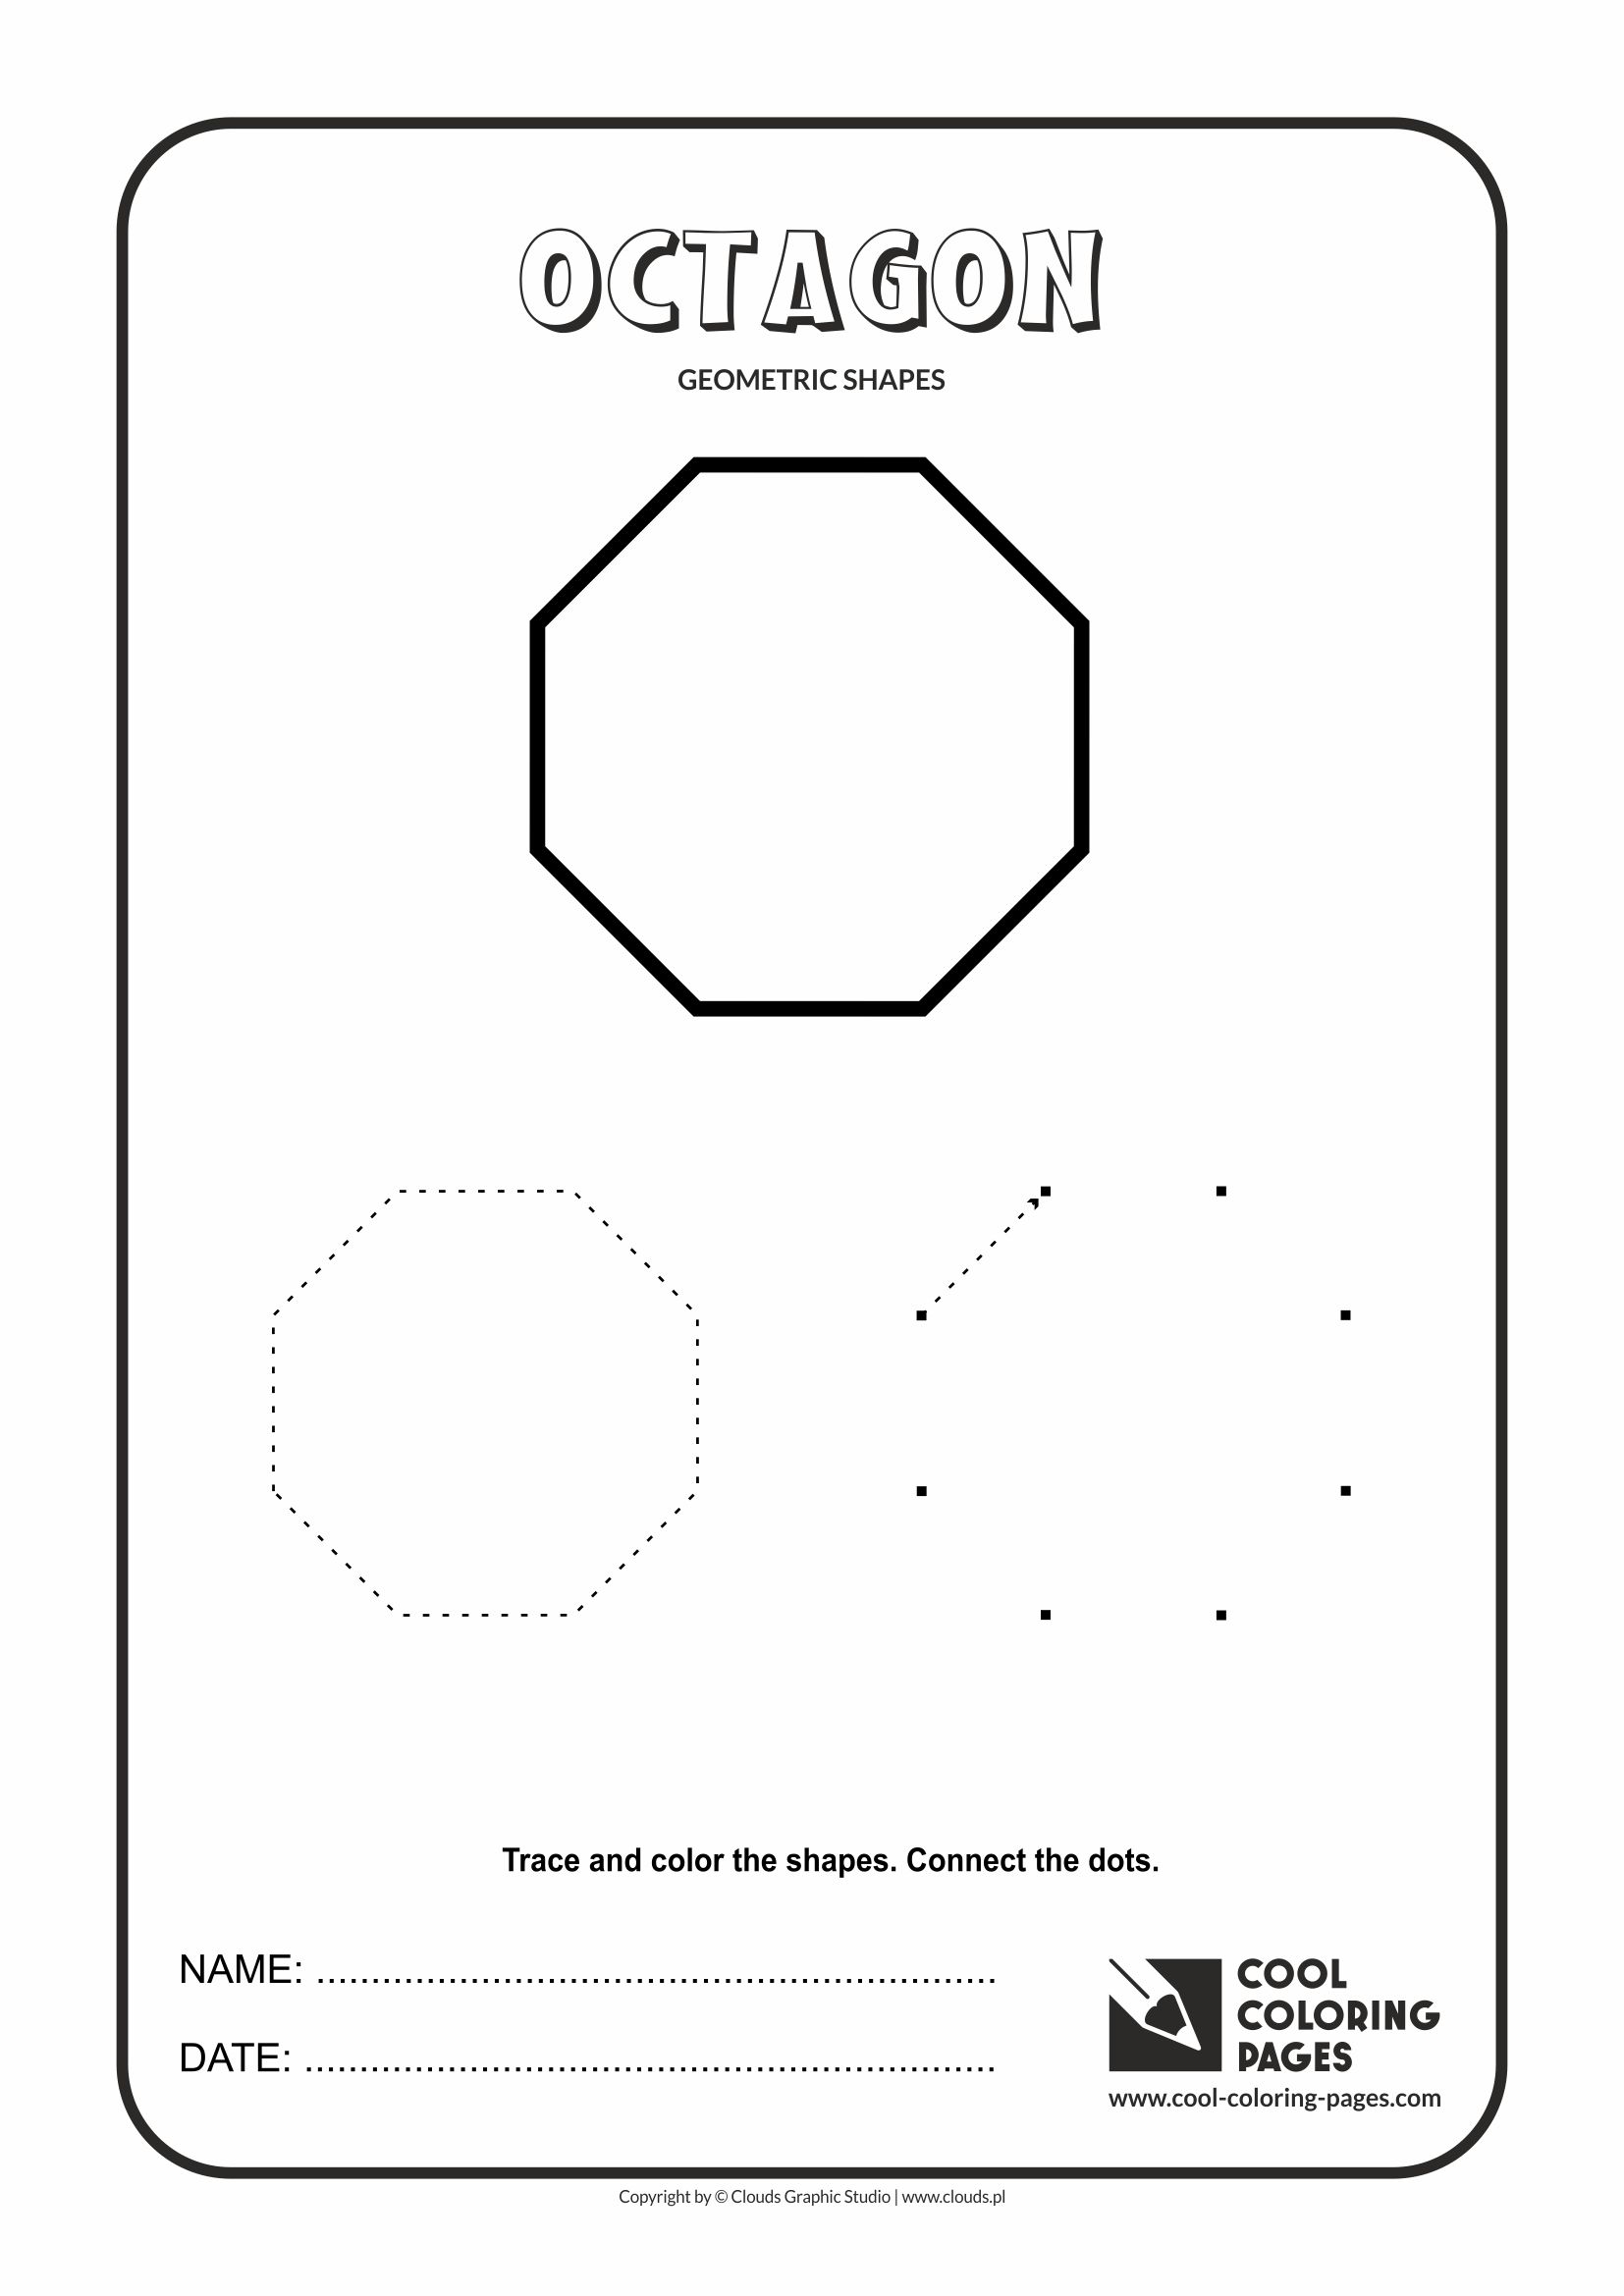 Cool coloring pages octagon